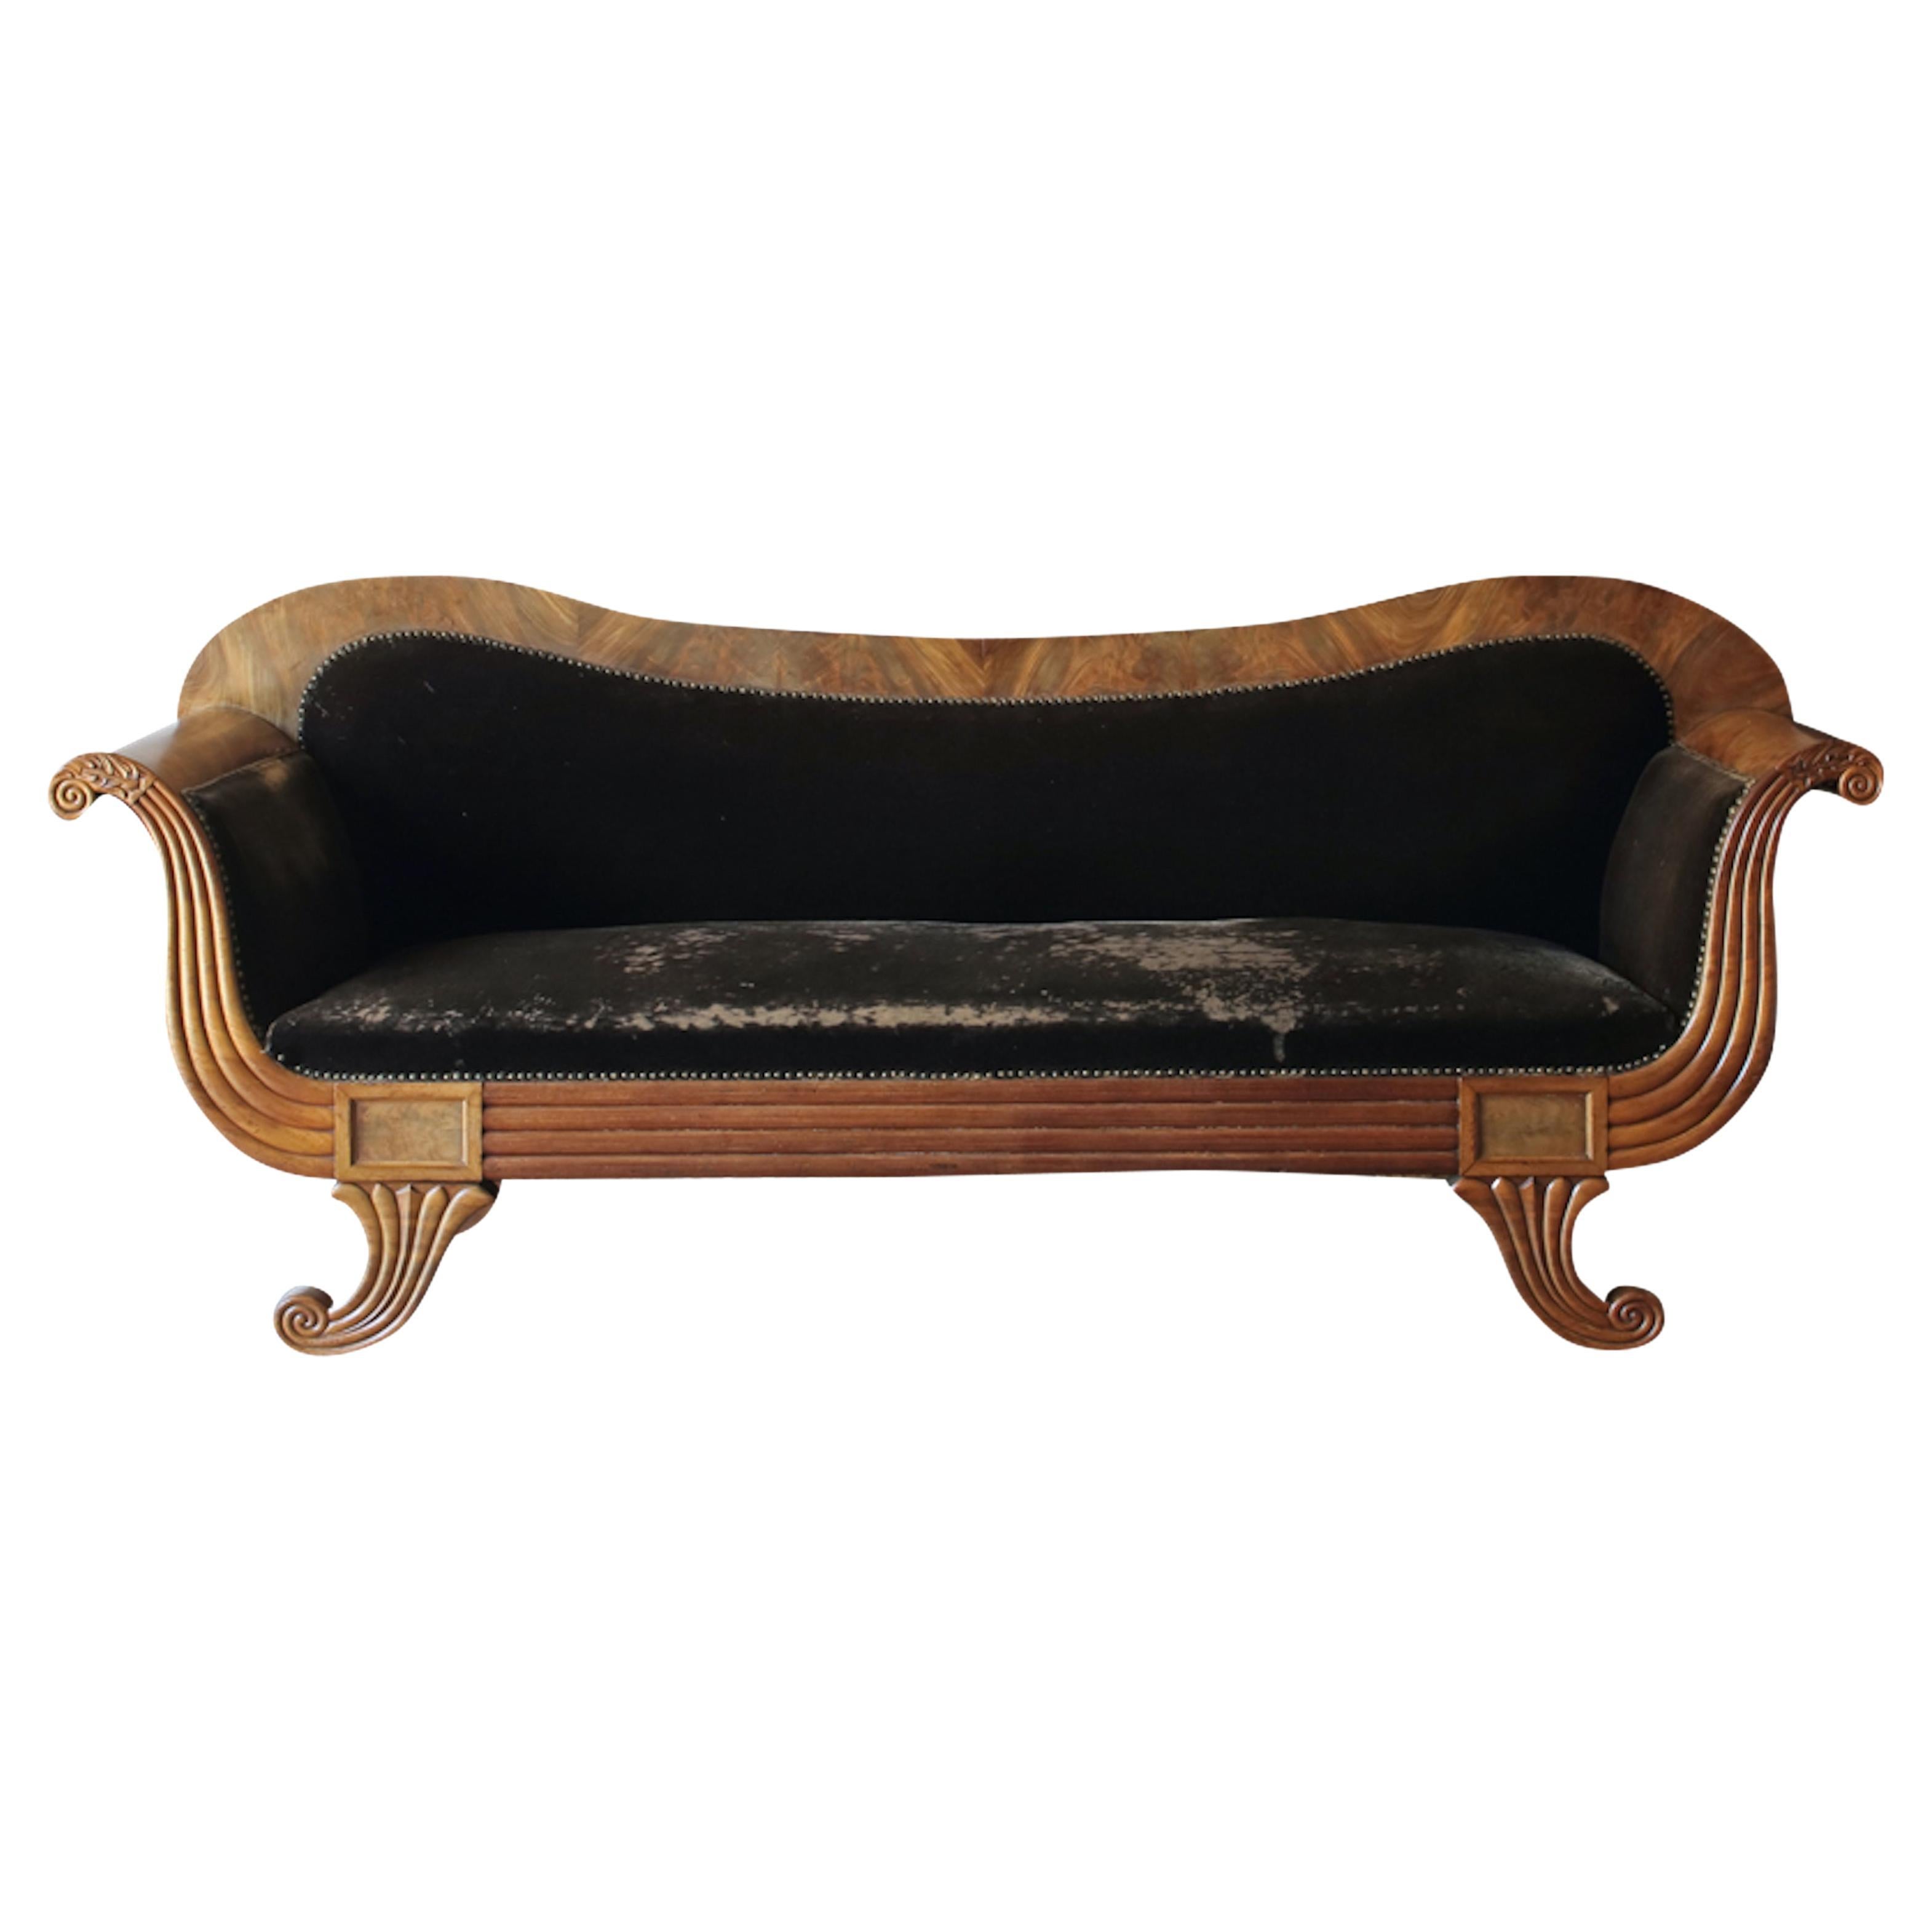 19th Century French Empire Style Double Ended Mahogany Sofa For Sale